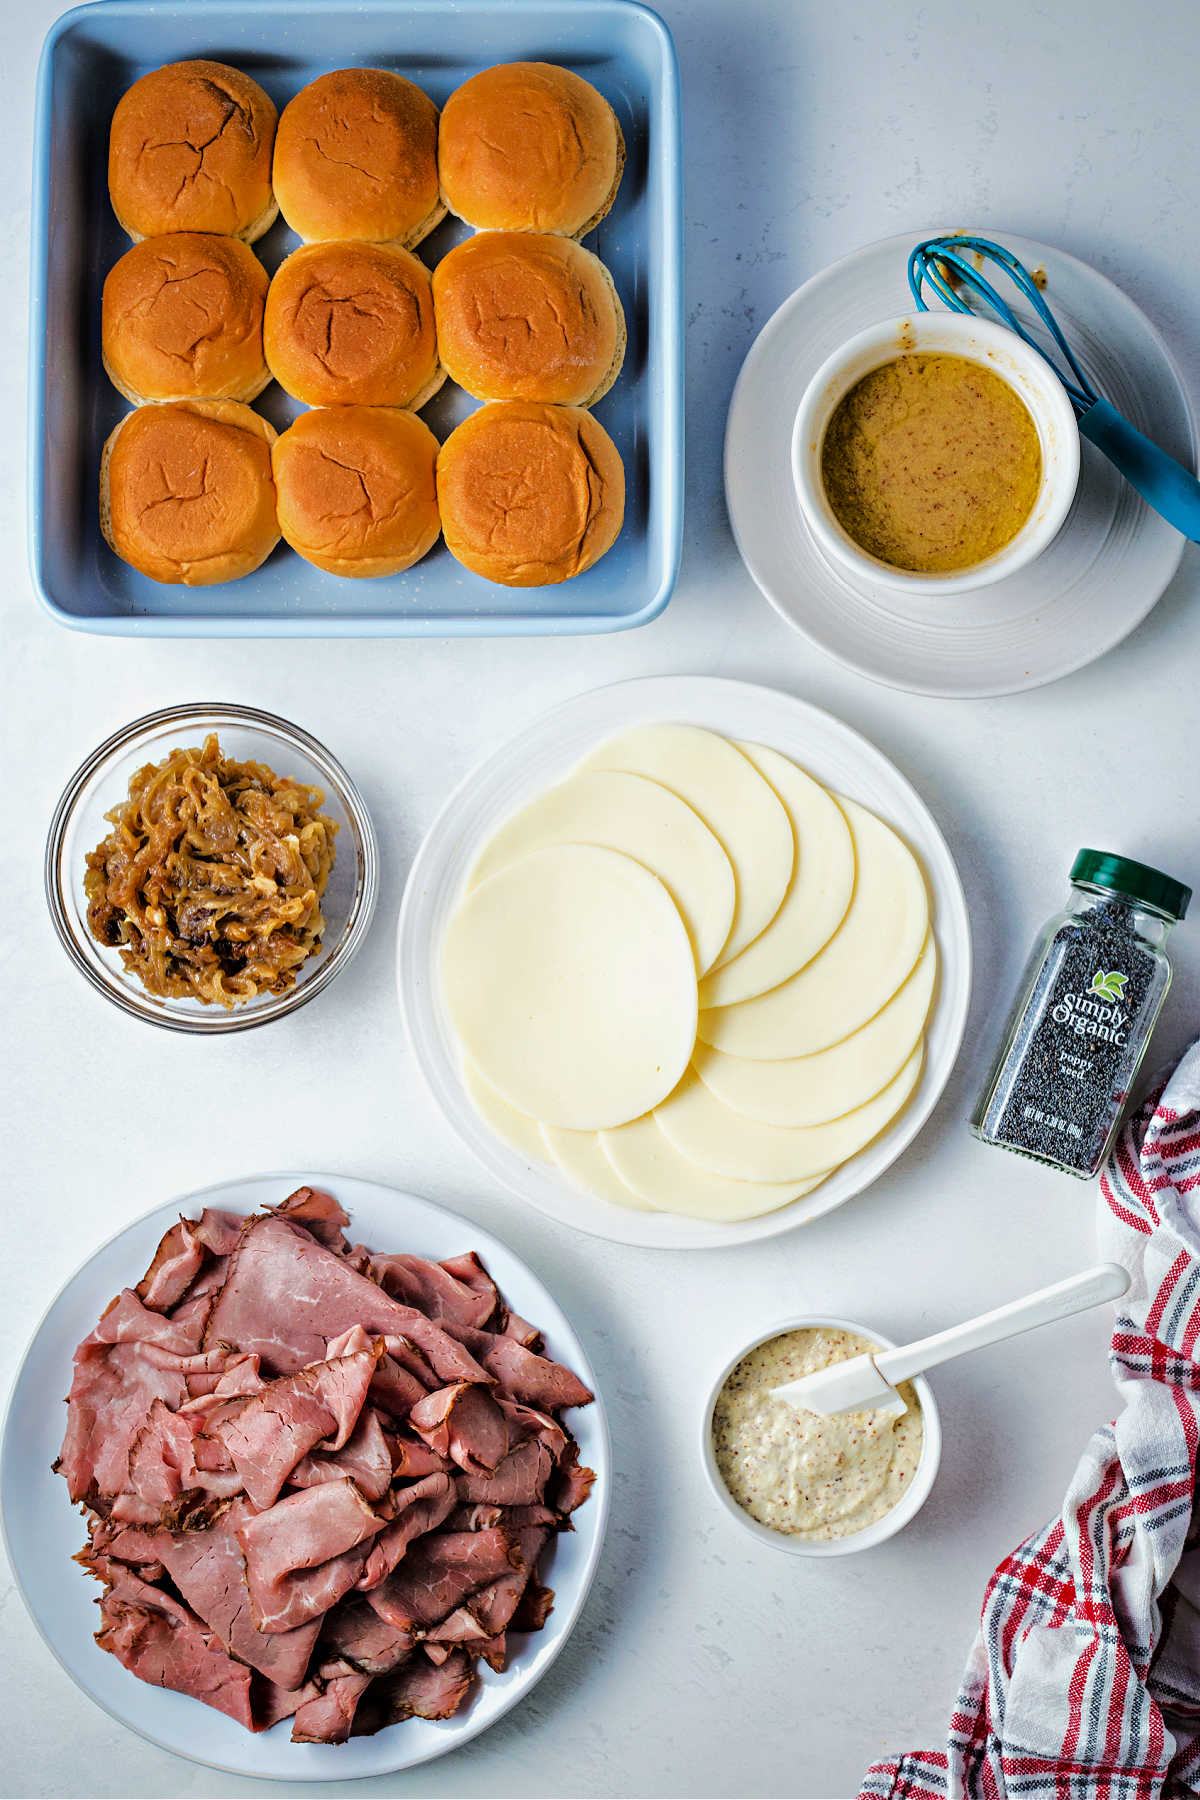 ingredients for making roast beef sliders on a table: slider buns, deli roast beef, horseradish aioli, caramelized onions, provolone cheese slices, and butter sauce.